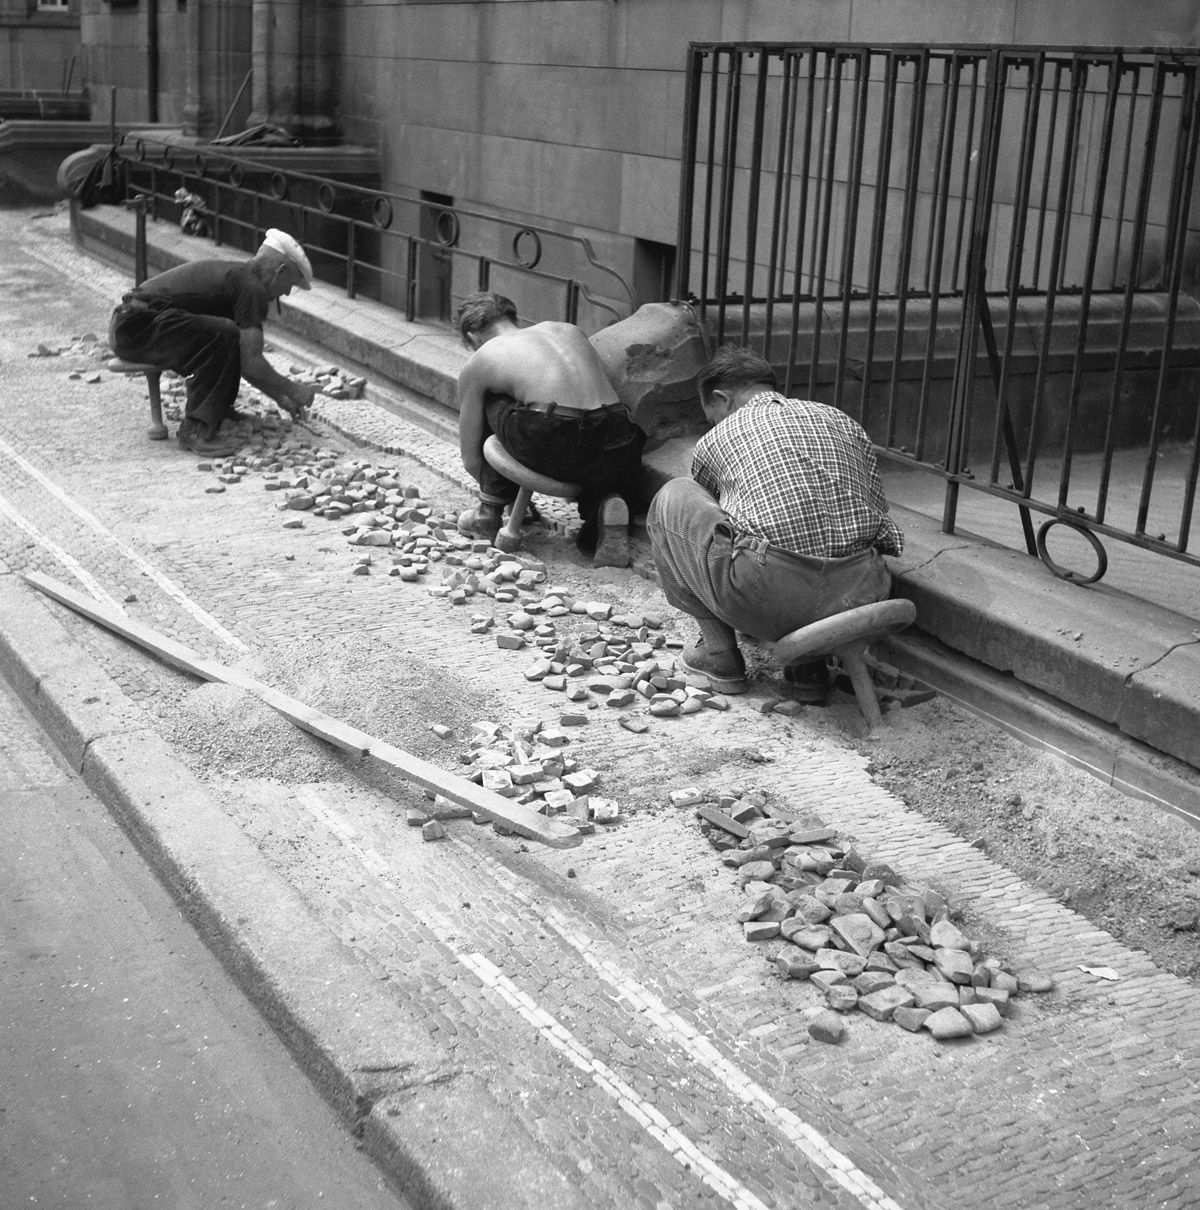 Road workers are paving a road with natural pebble, Freiburg ca. 1945 to 1955